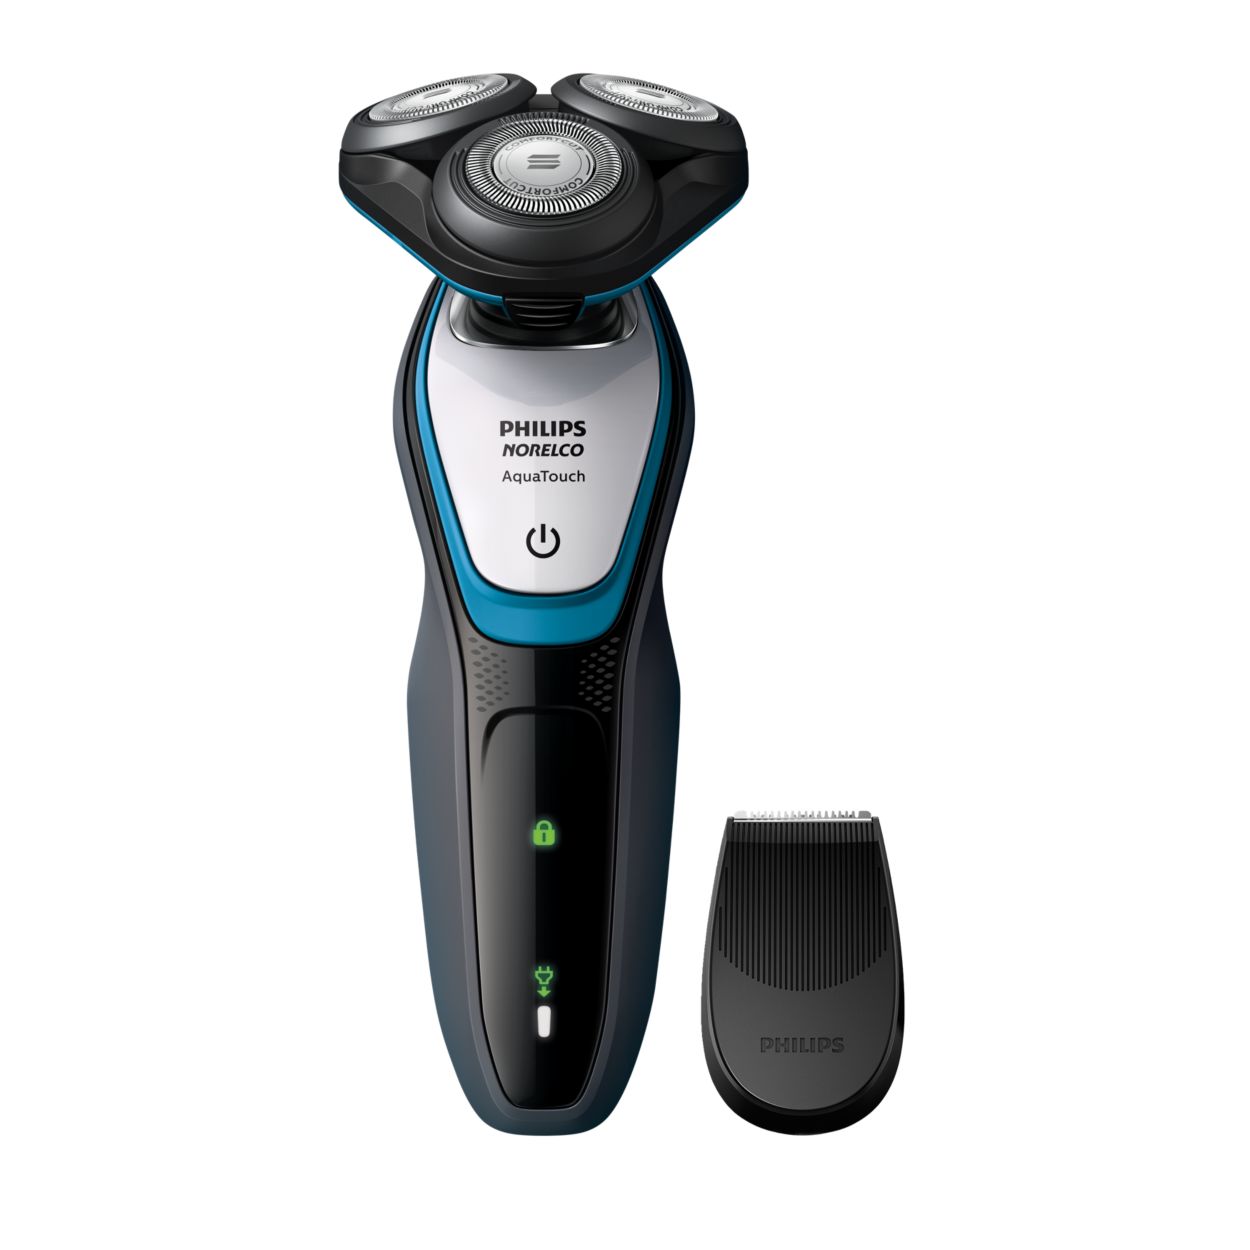 Offer Welsprekend Meesterschap AquaTouch Wet and dry electric shaver S5090/87 | Norelco